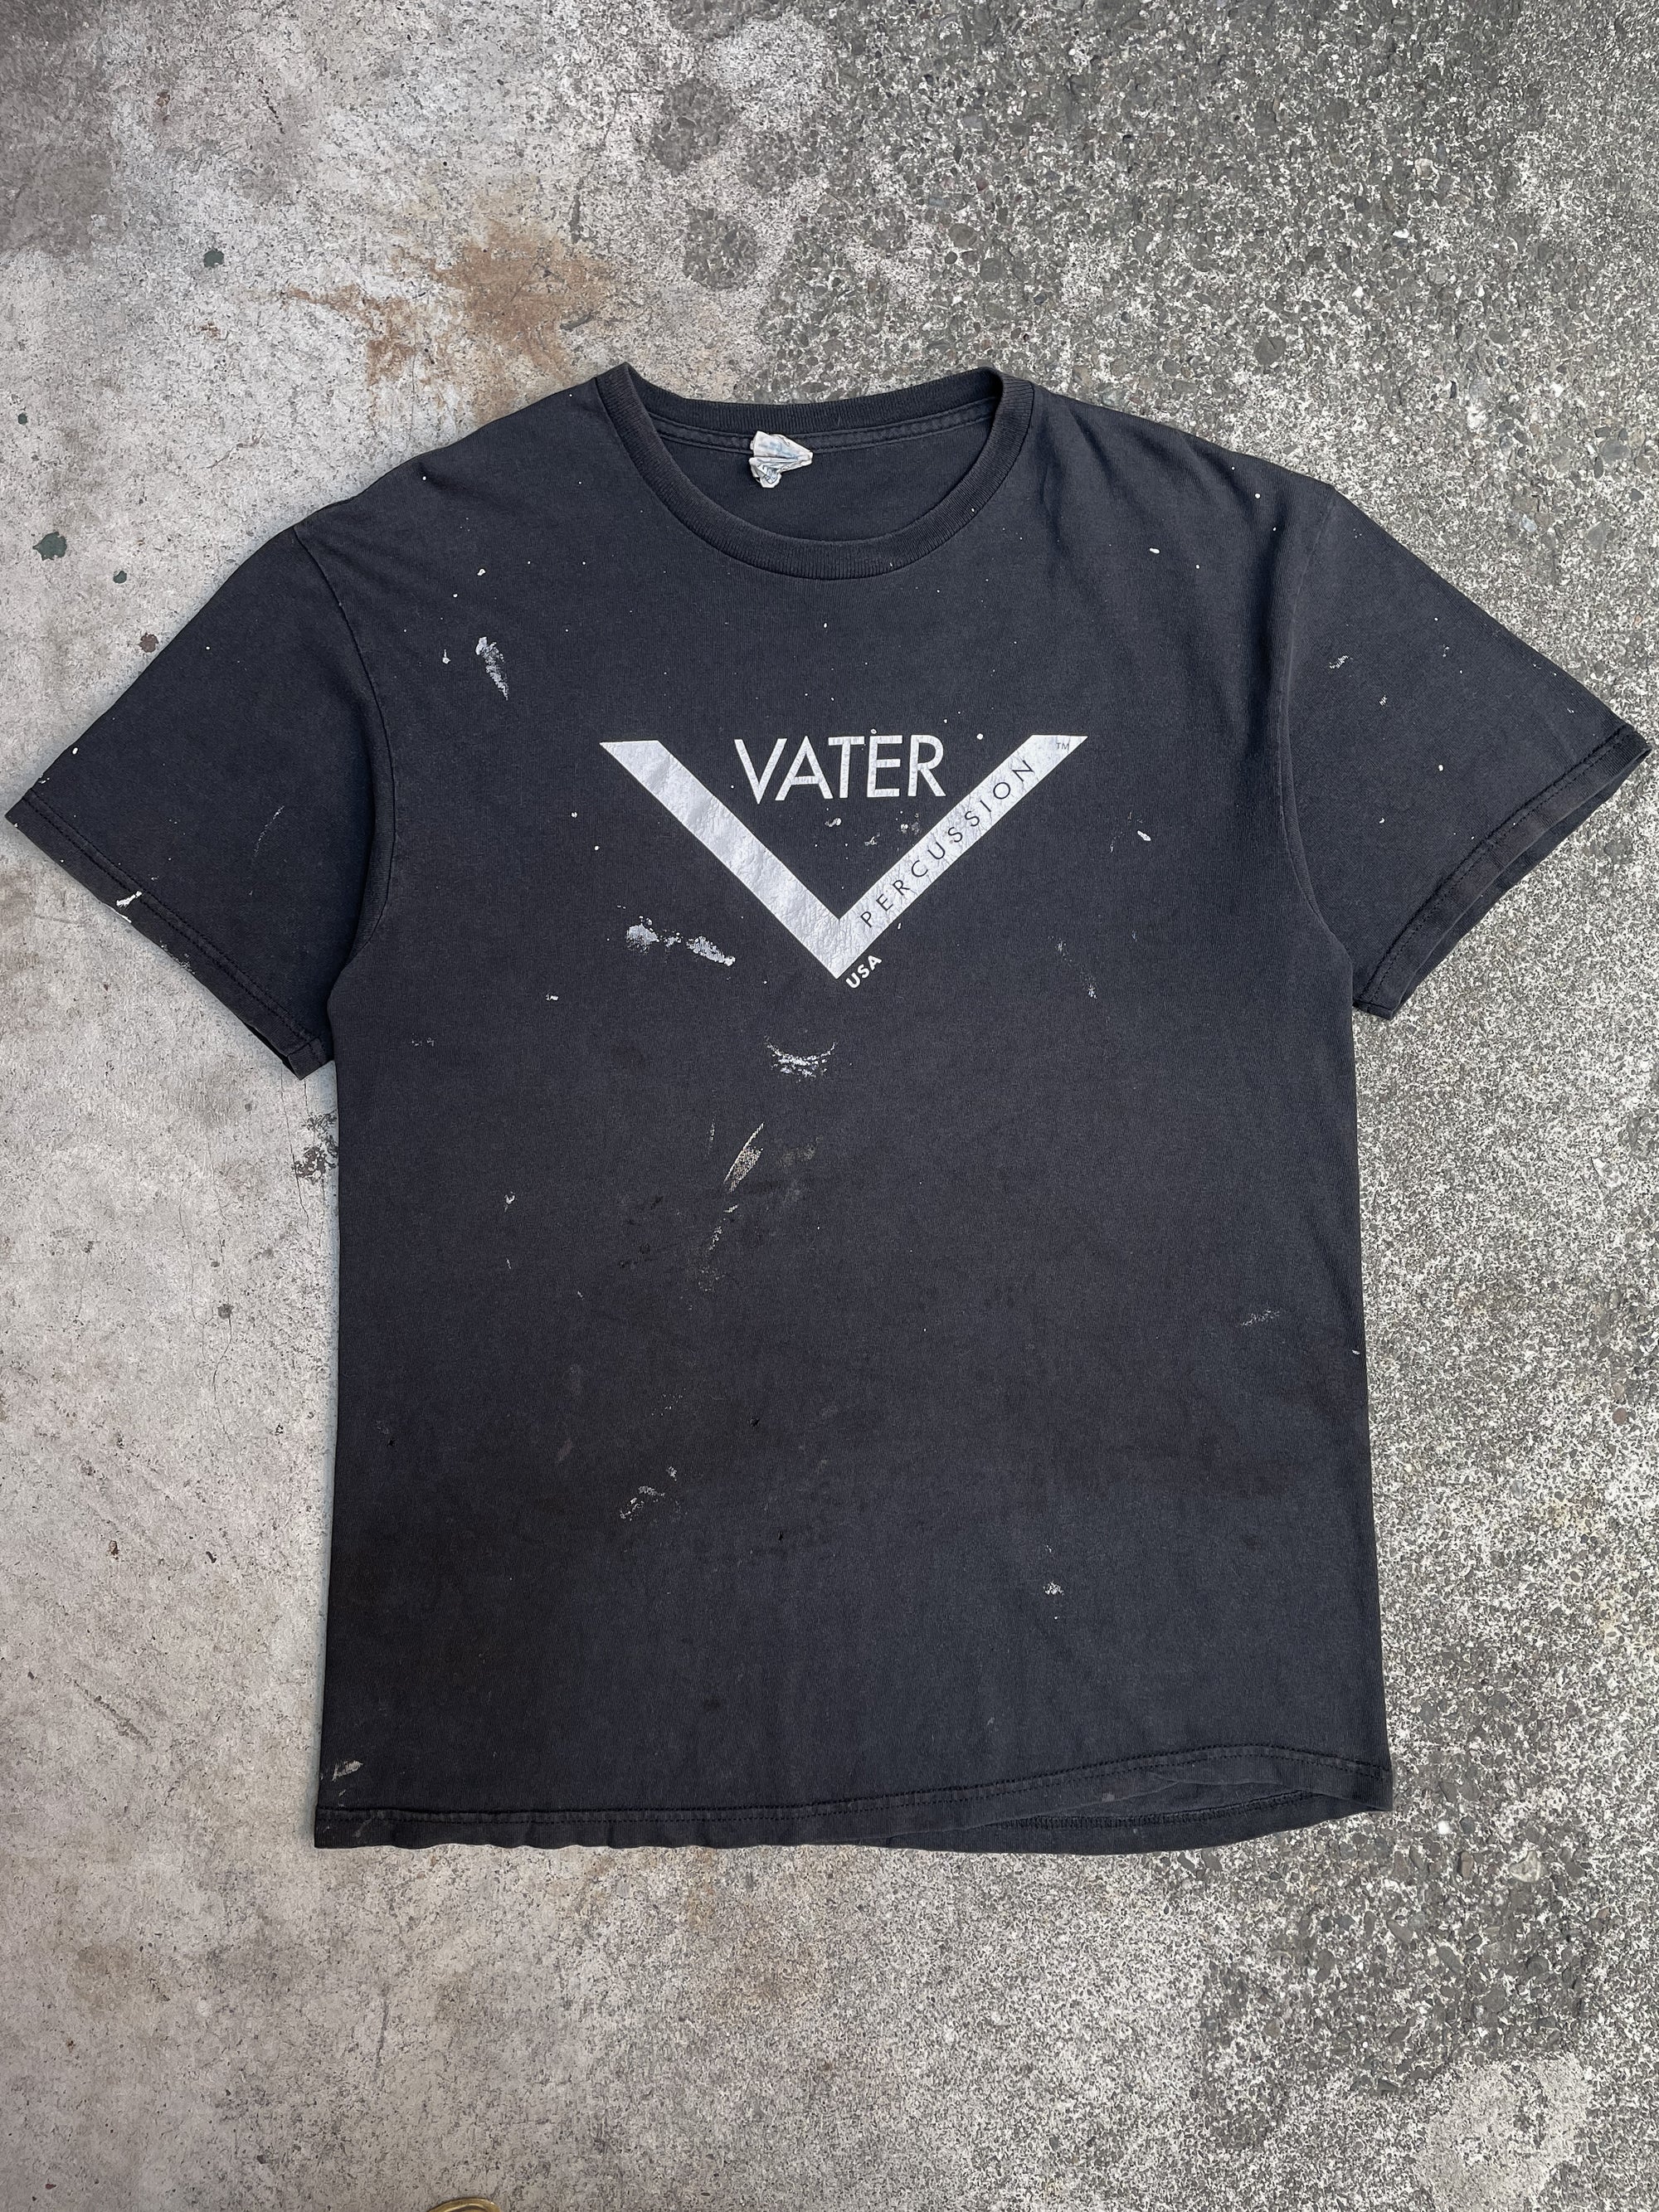 Vintage “Vater Percussion” Painted Faded Black Tee